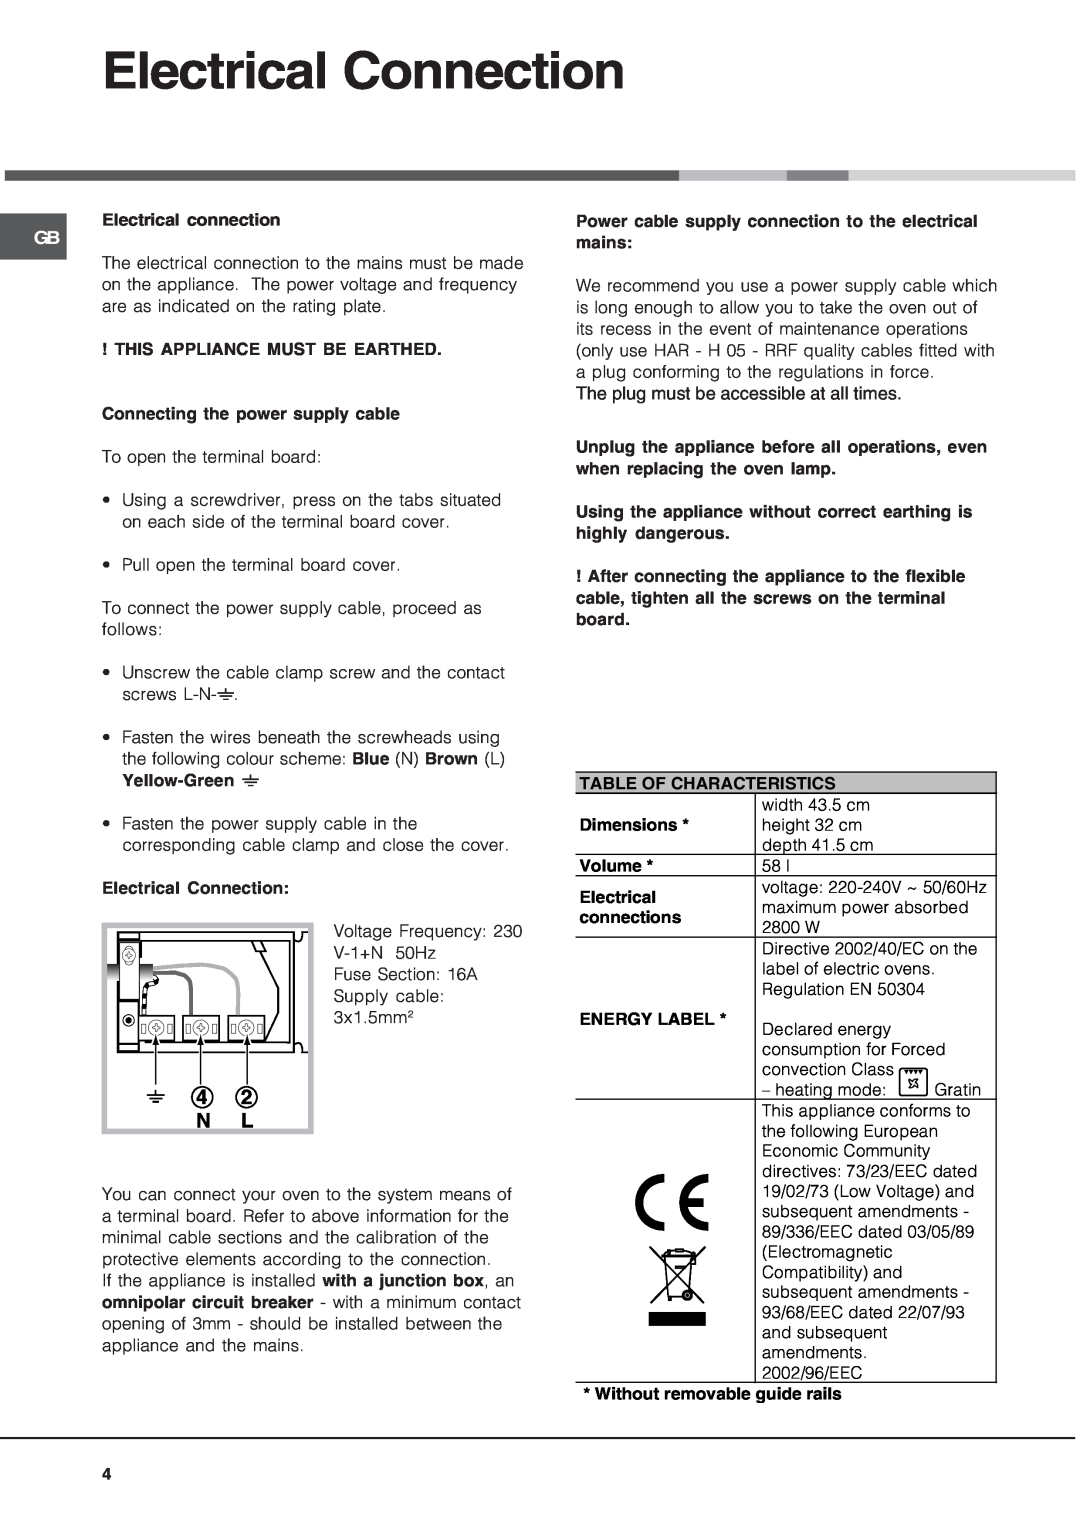 Hotpoint SE48101PX manual Electrical Connection, 4 2 N L, The plug must be accessible at all times 